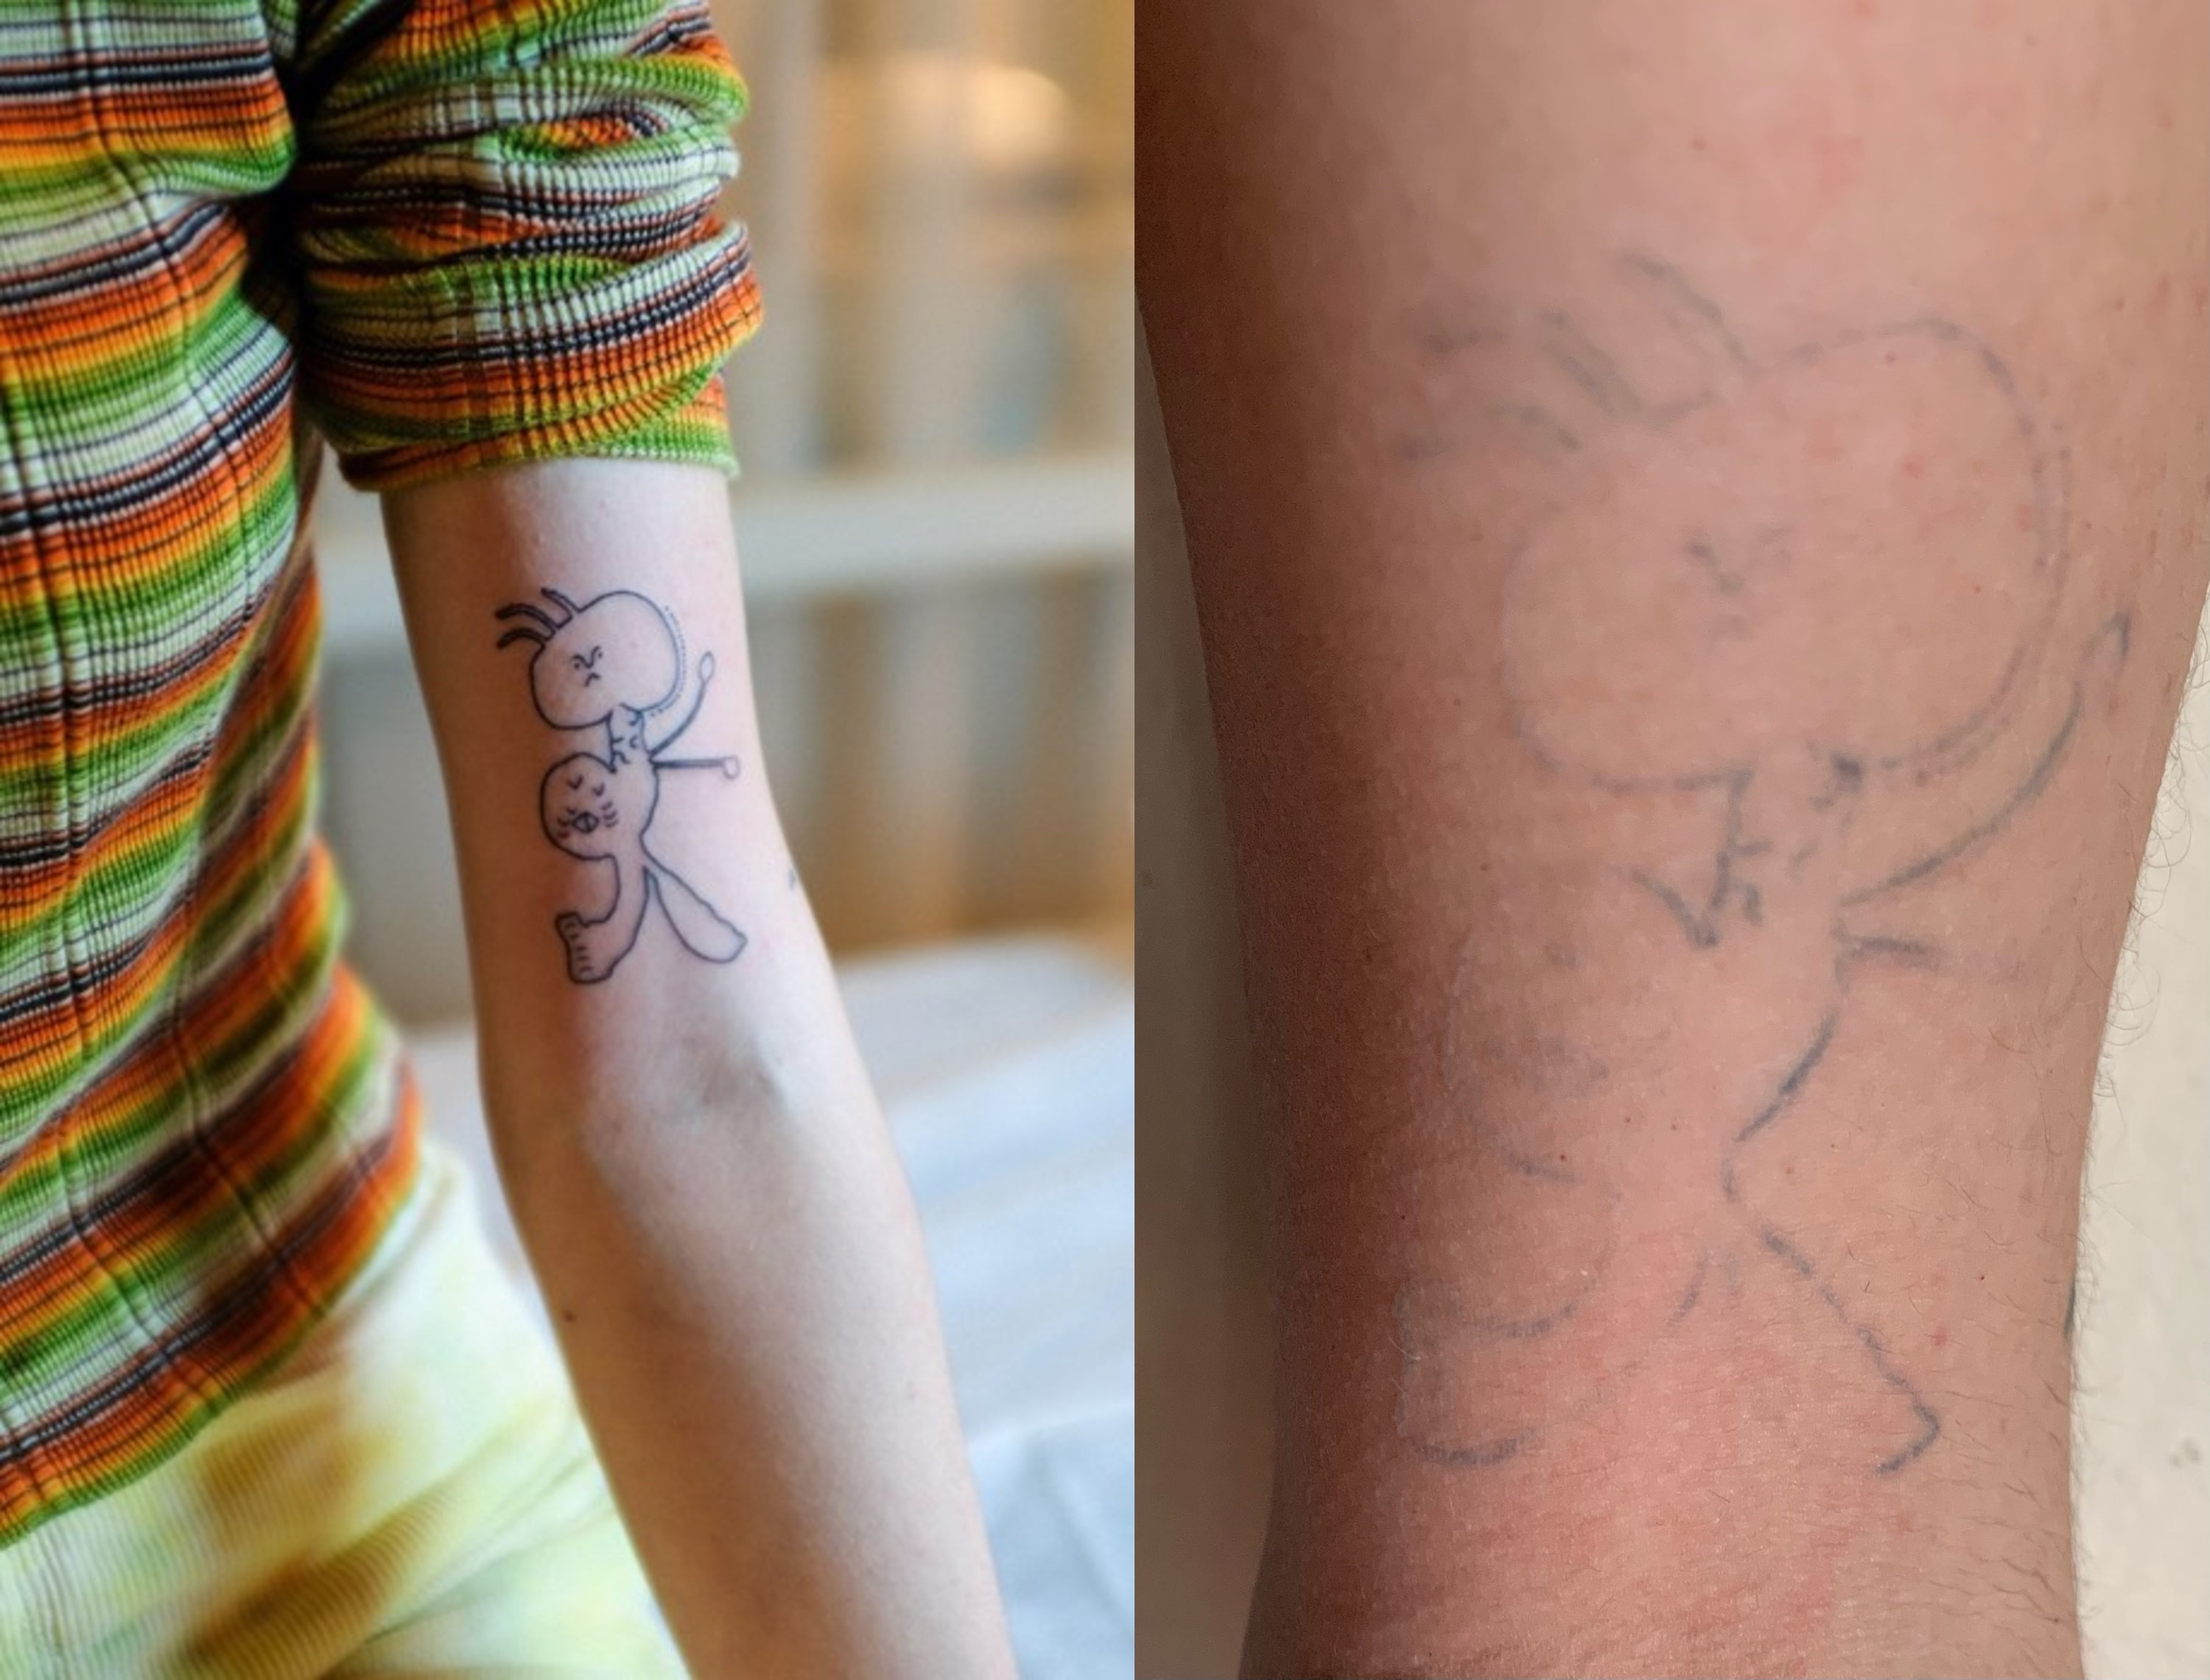 The temporary tattoo -- that looks like the real thing